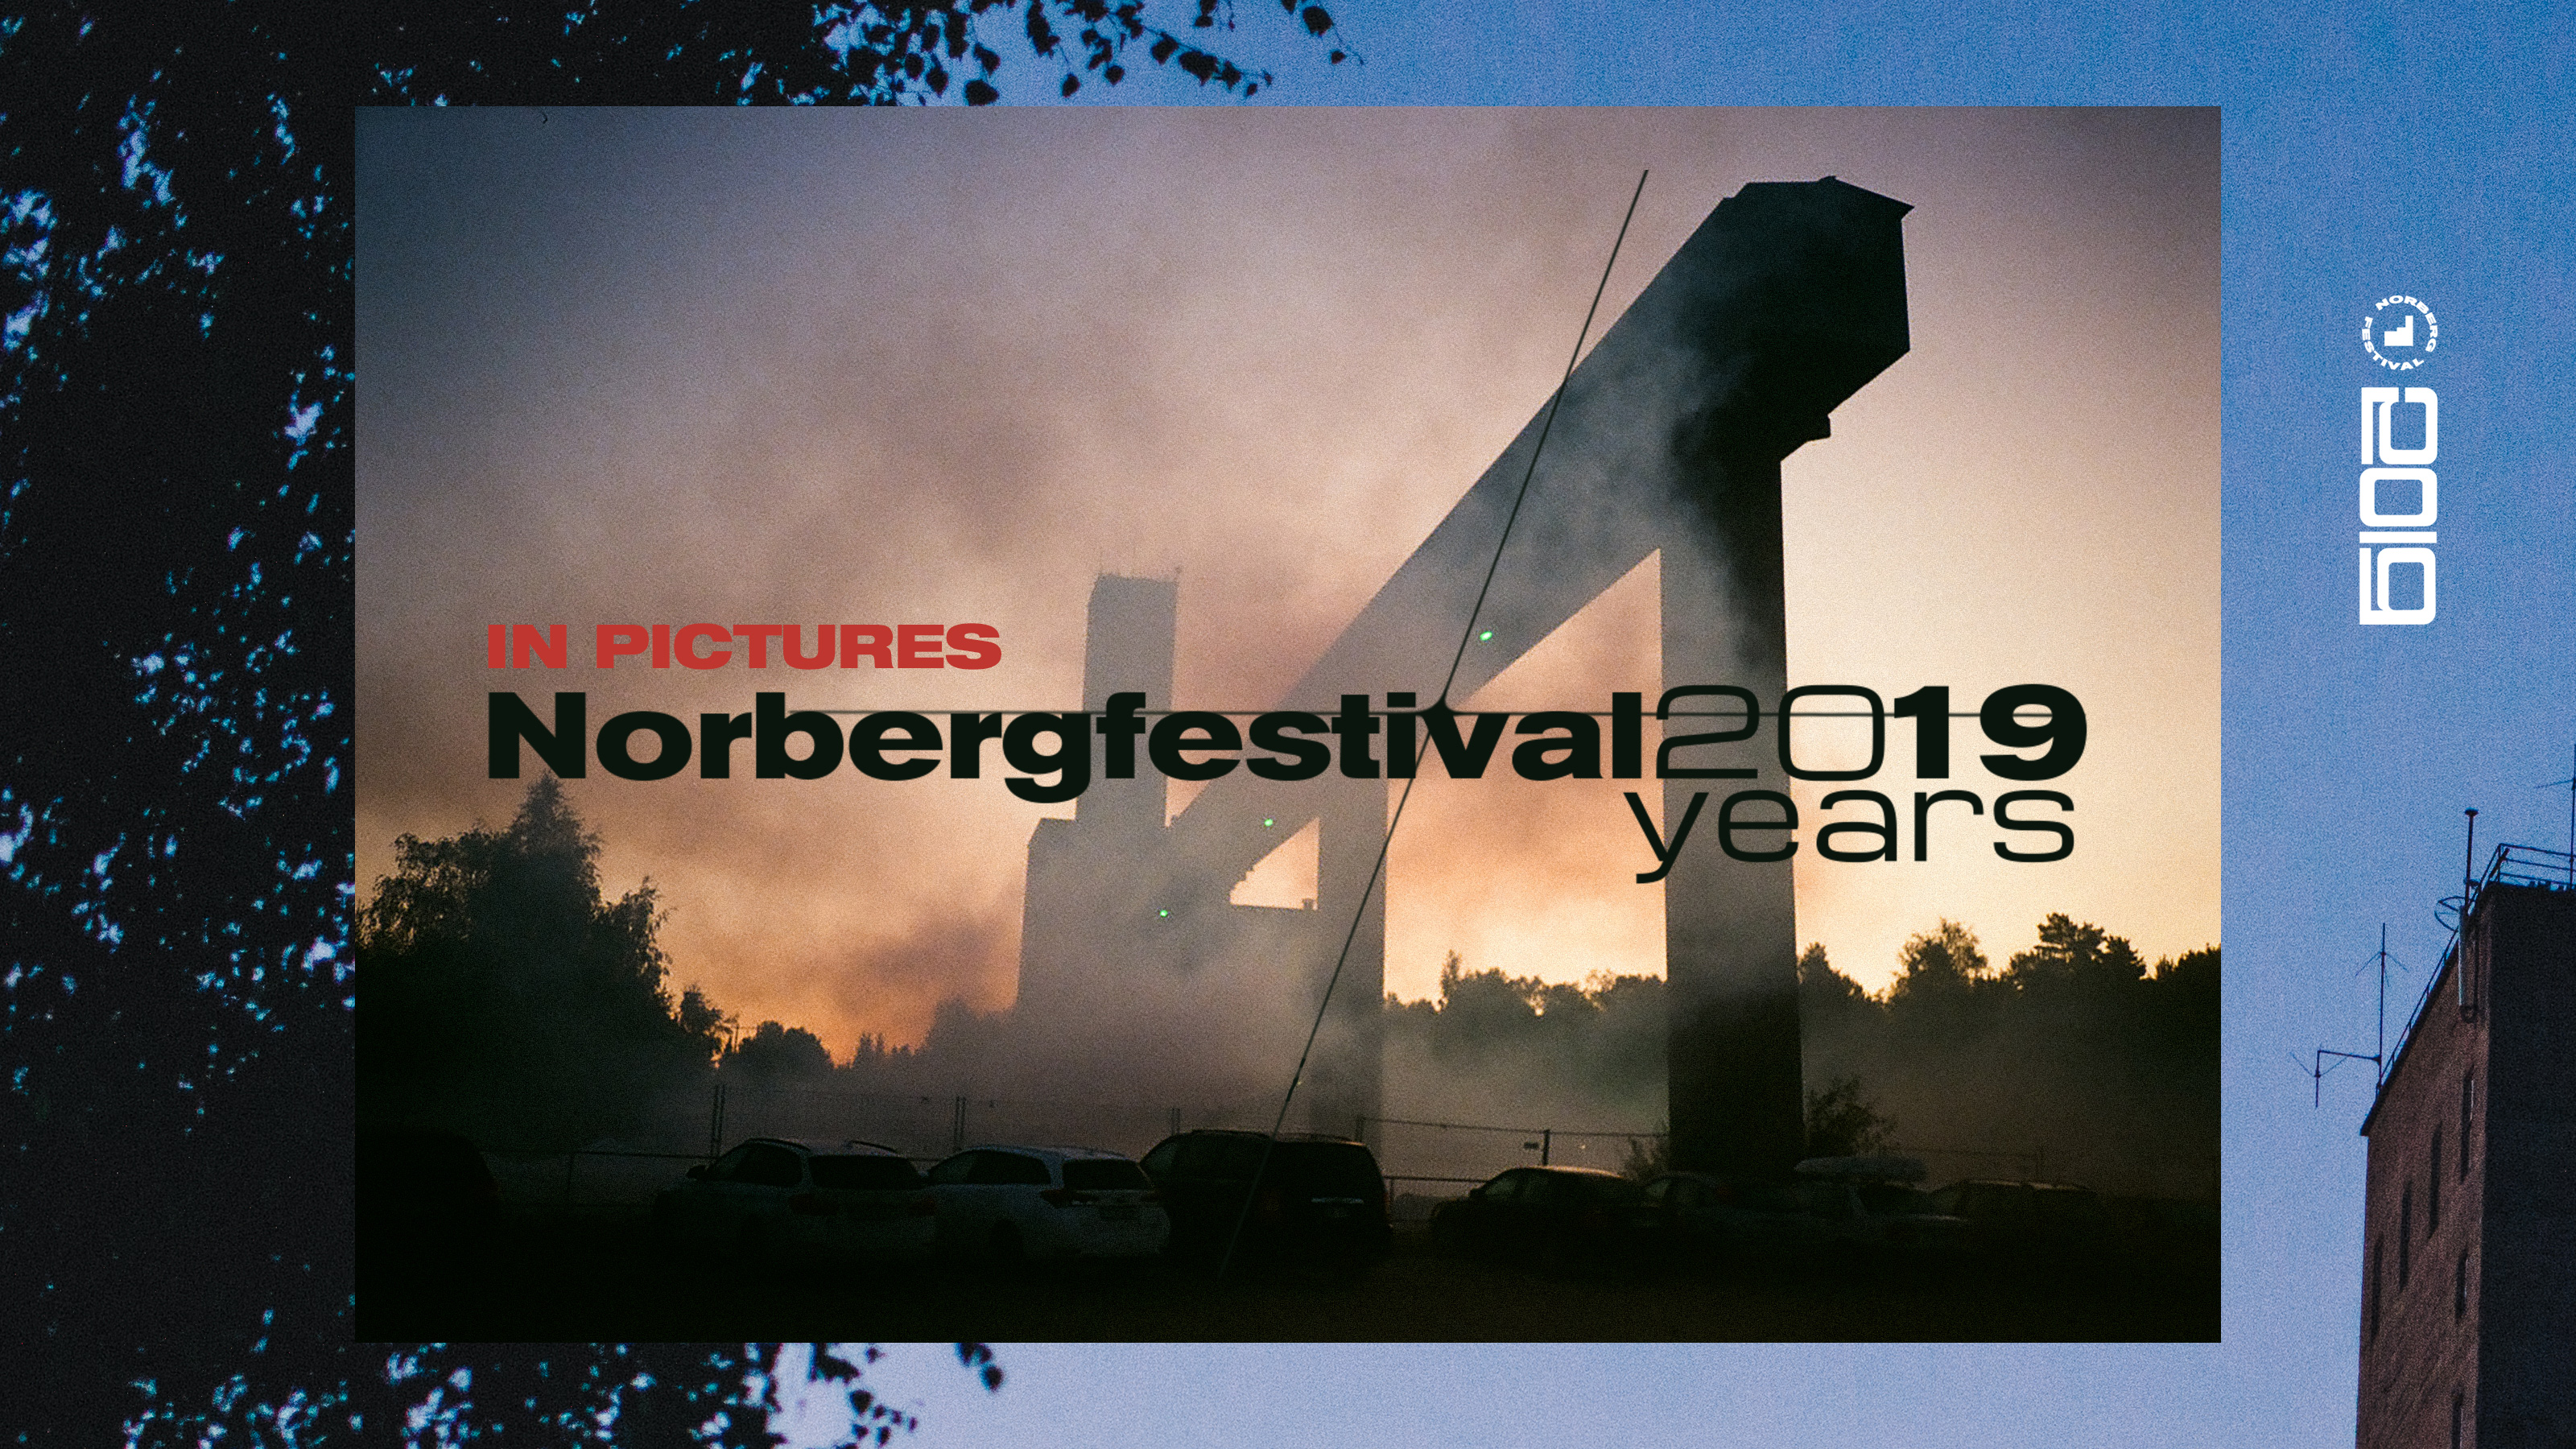 Norbergfestival 2019 in pictures